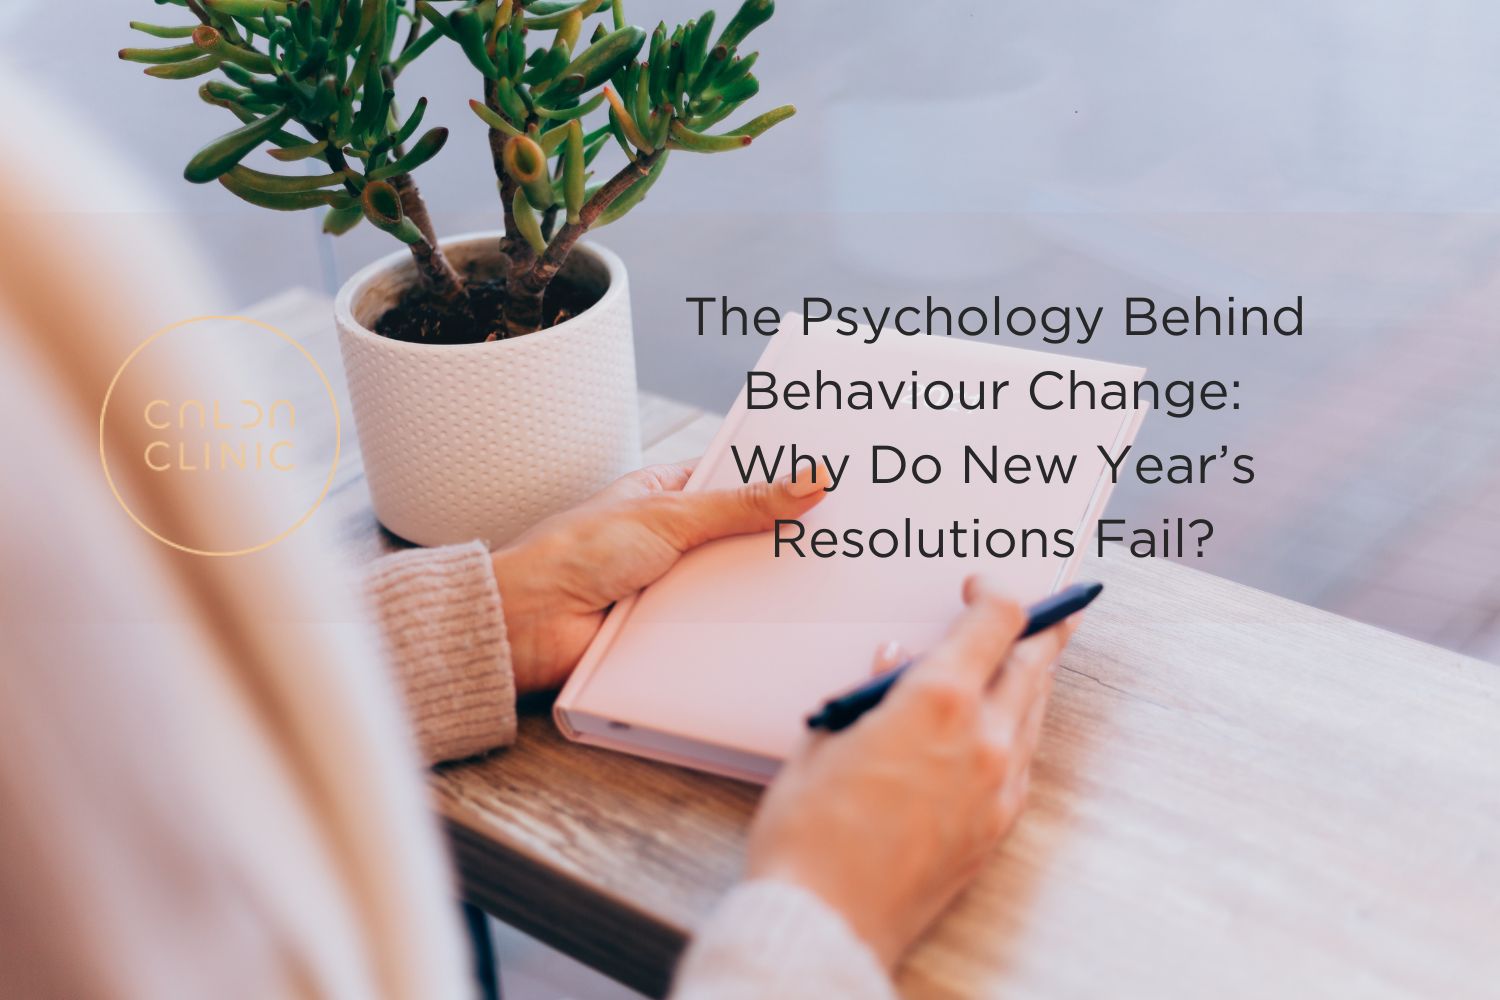 The Psychology Behind Behaviour Change Why Do New Year’s Resolutions Fail